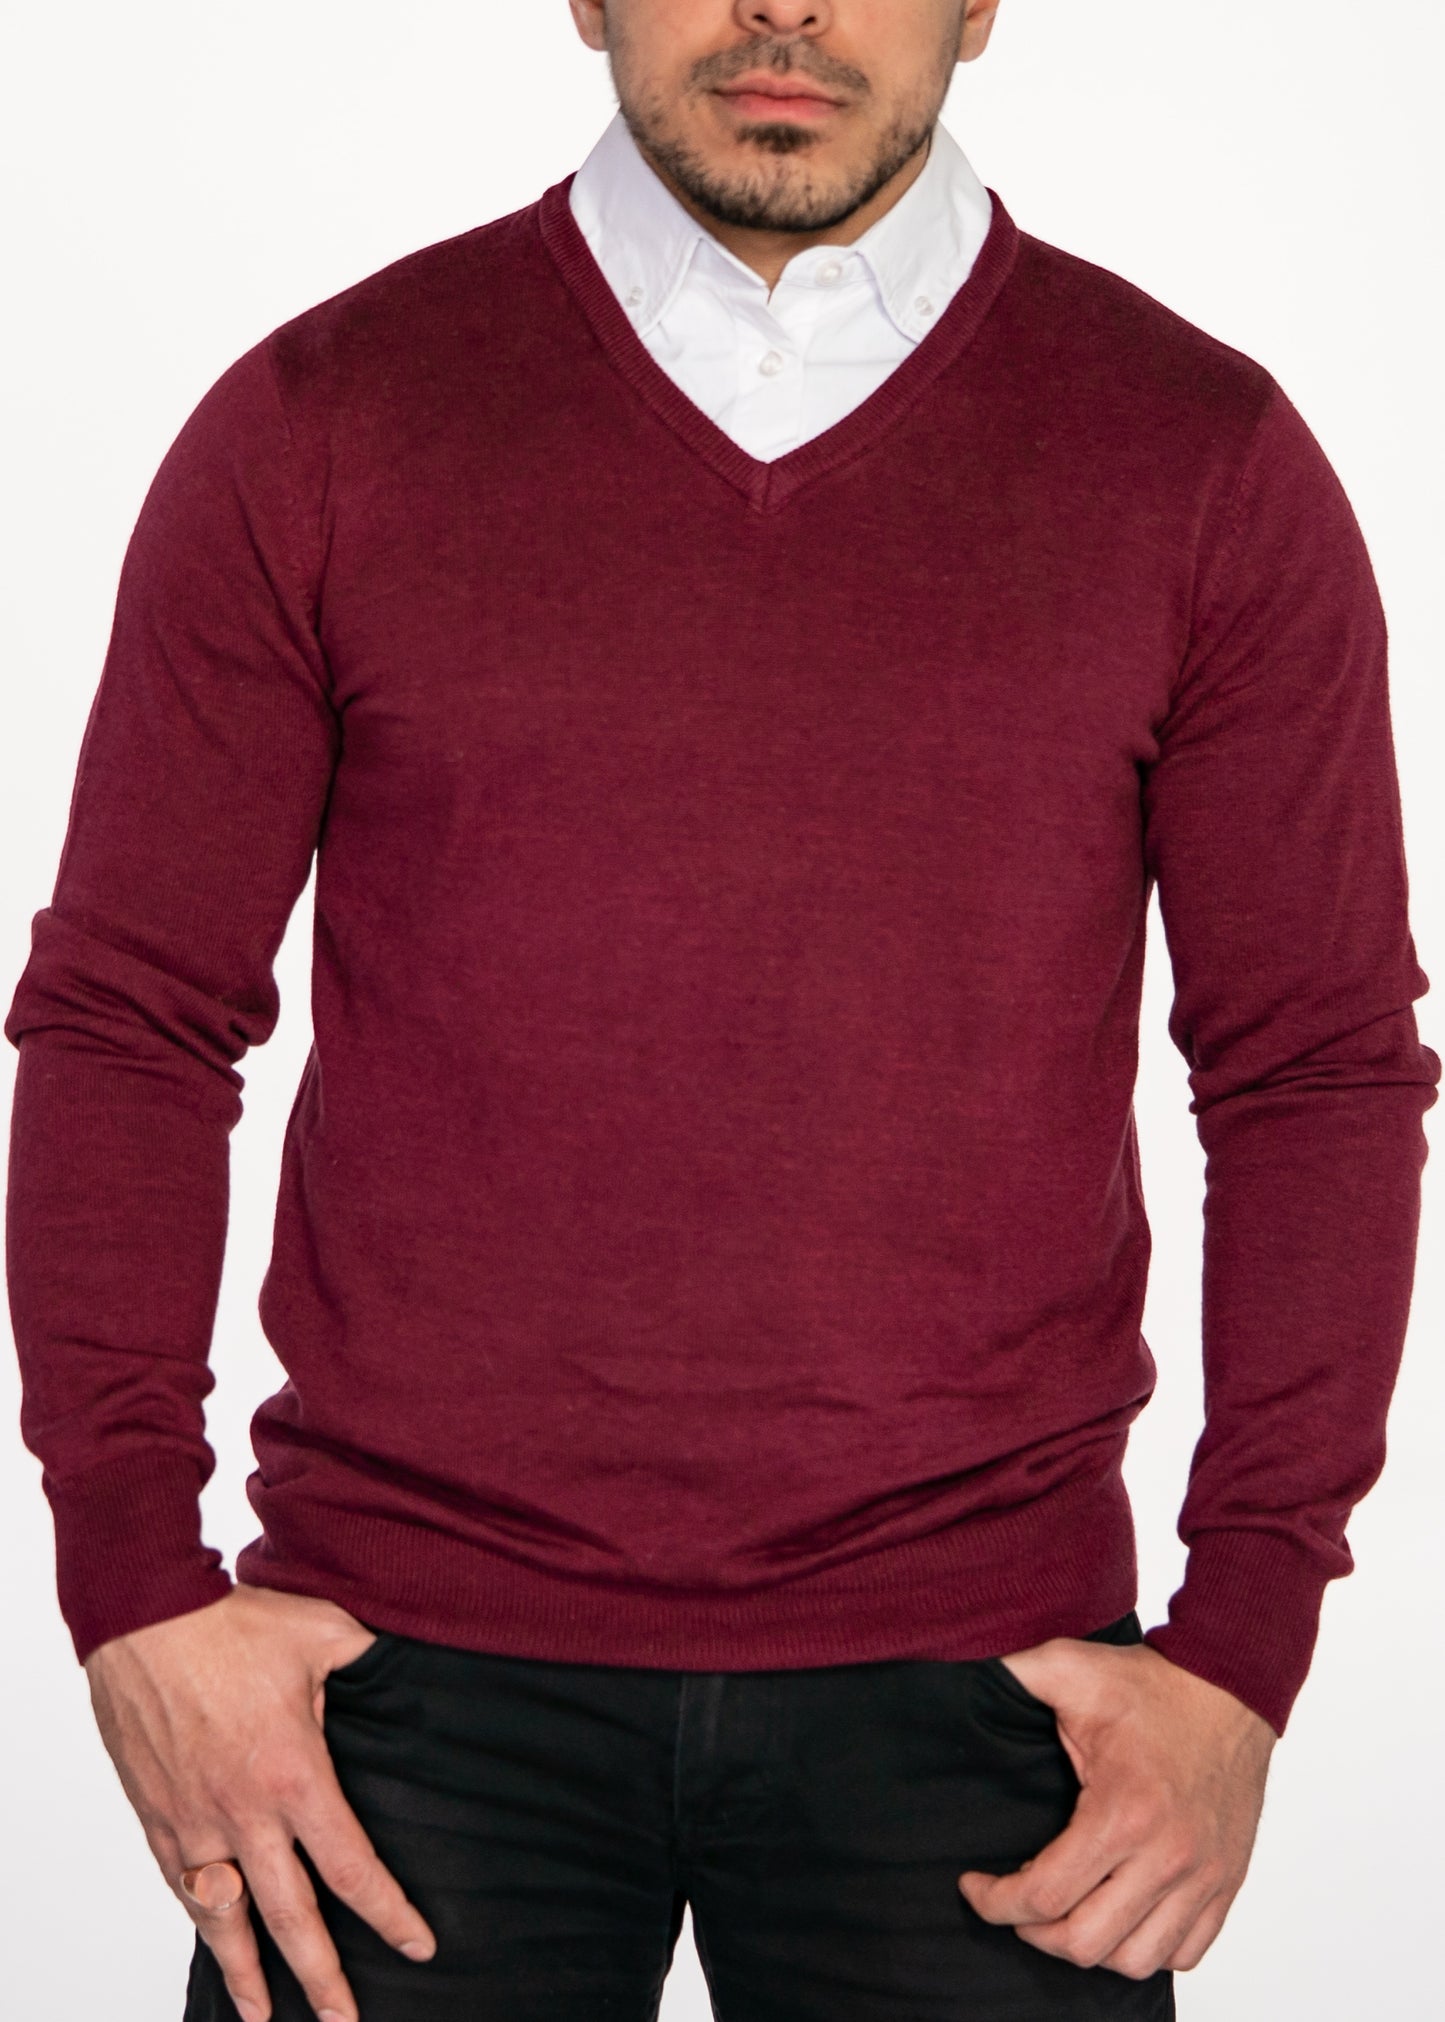 Men's Burgundy with White Collared Shirt – Flying Point Apparel